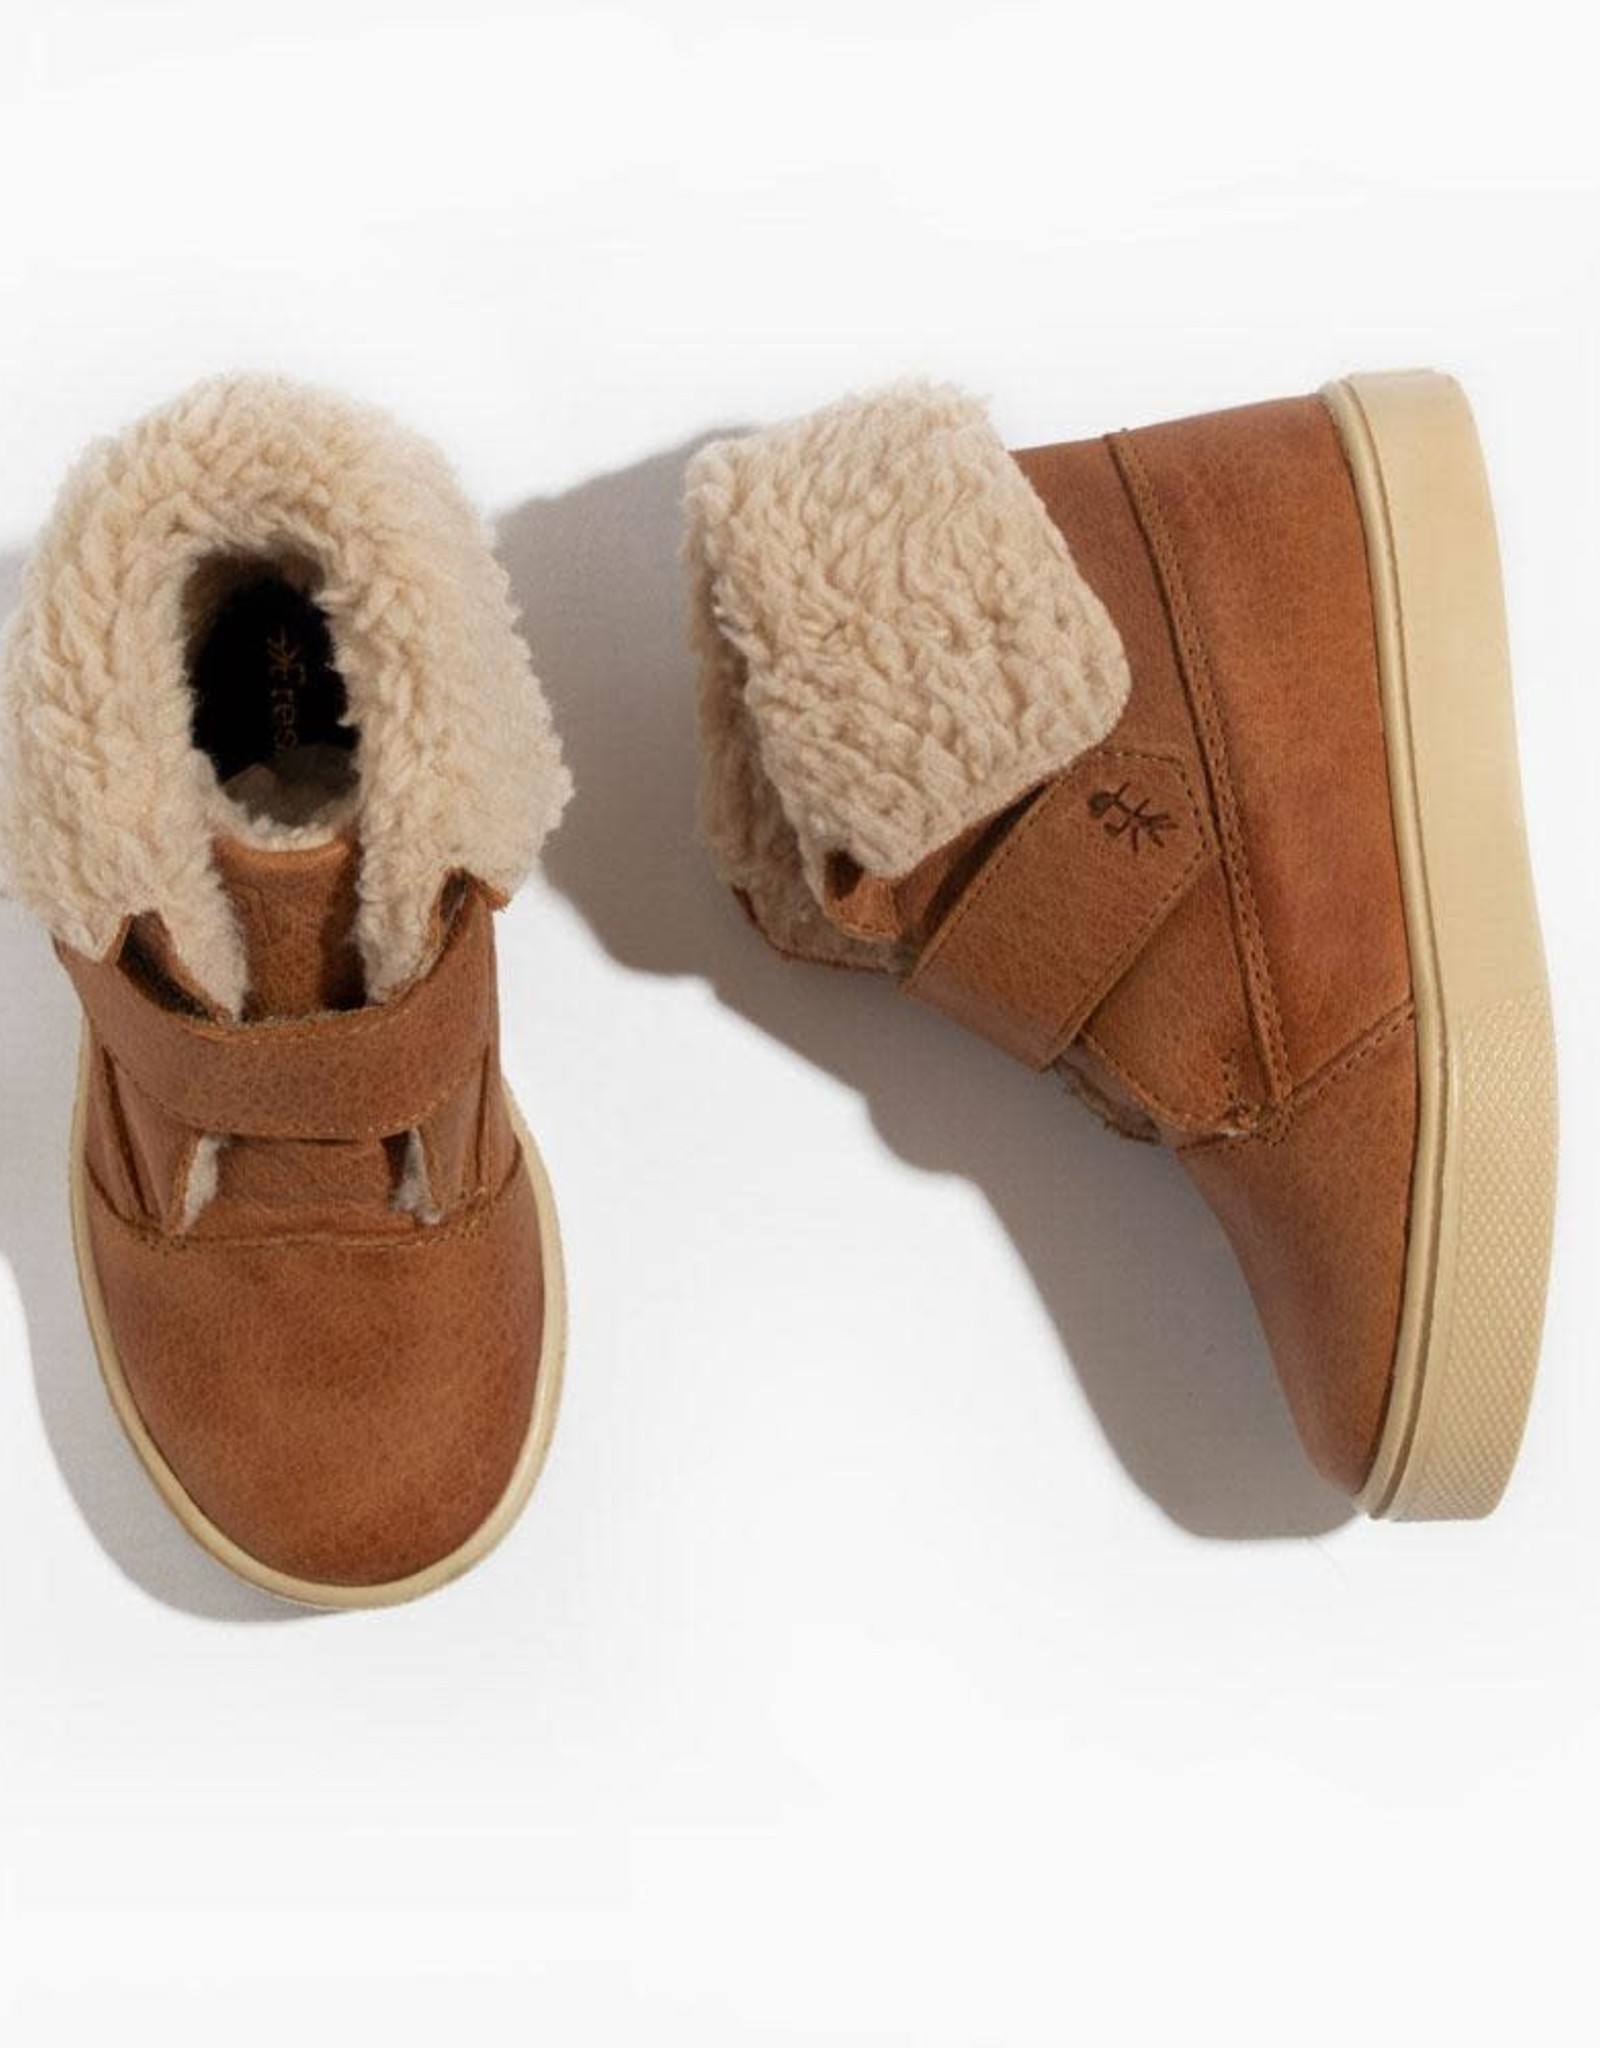 Freshly Picked sherpa boot- zion